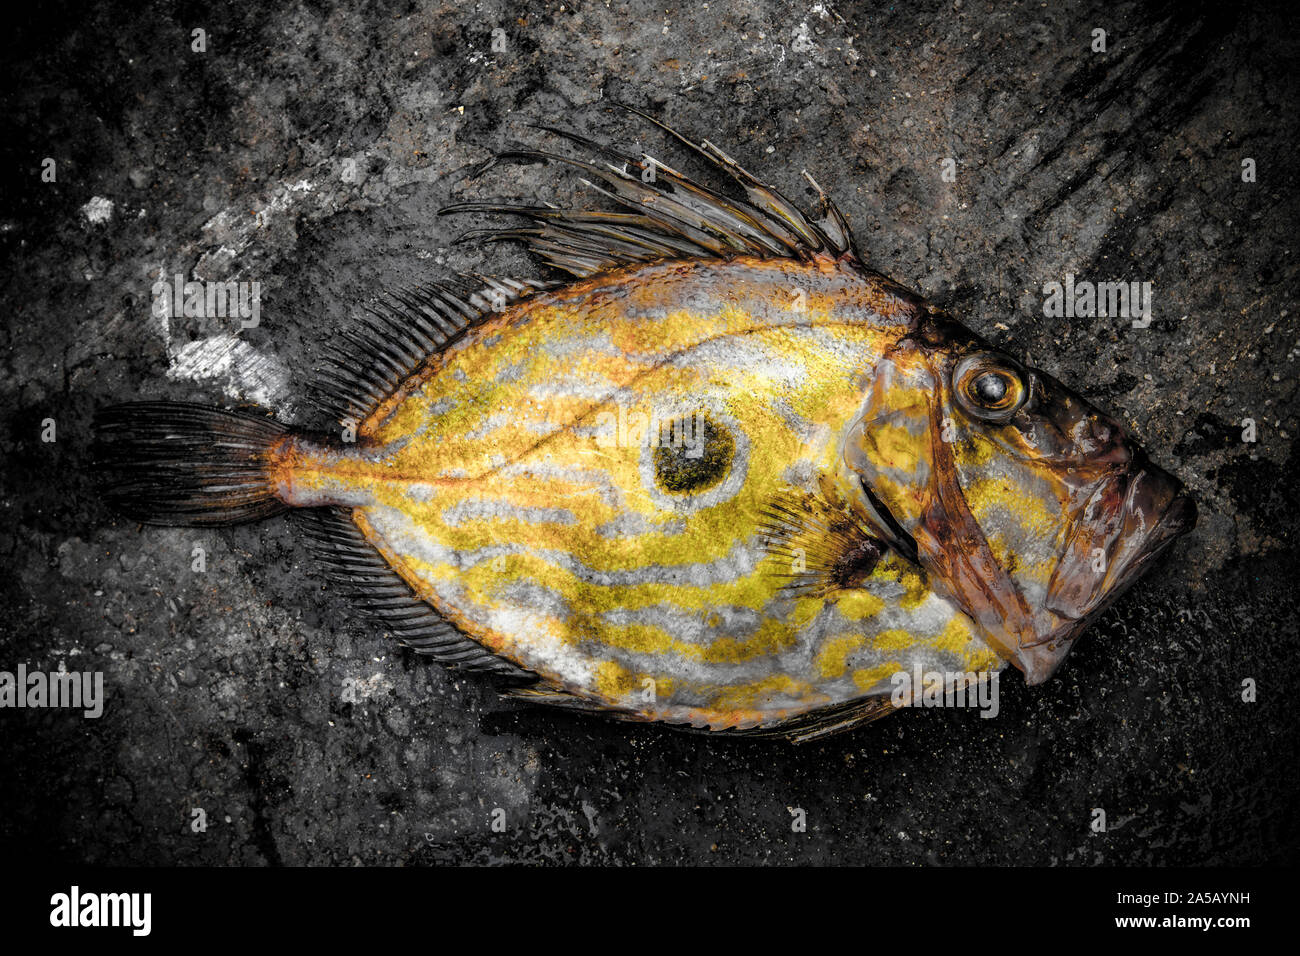 A John Dory, Zeus Faber, caught in the English Channel. The John Dory is also known as St Peter’s fish, and the round mark on its sides is said to be Stock Photo